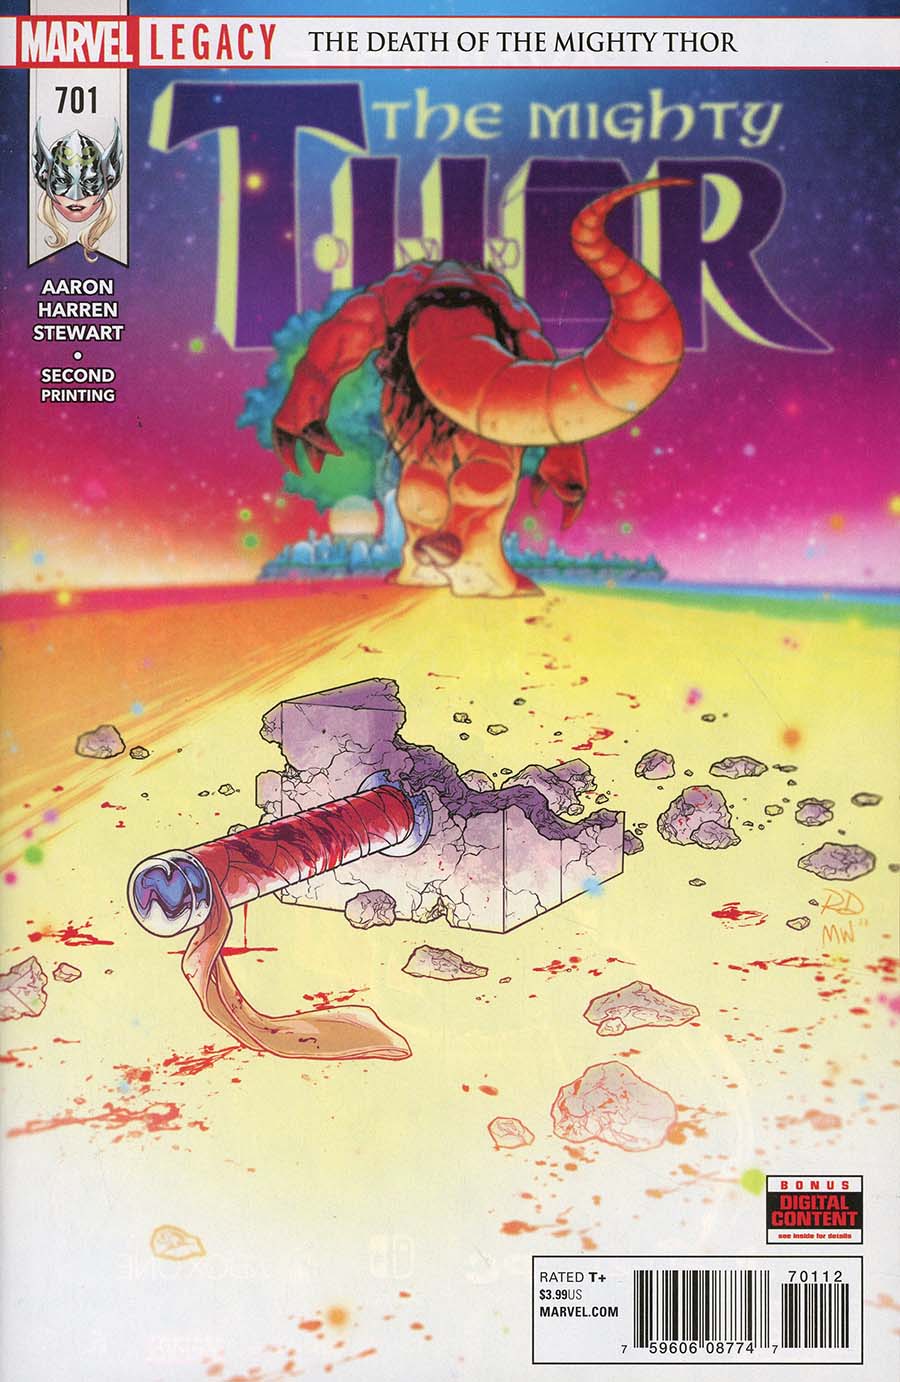 Mighty Thor Vol 2 #701 Cover C 2nd Ptg Russell Dauterman Cover (Marvel Legacy Tie-In)